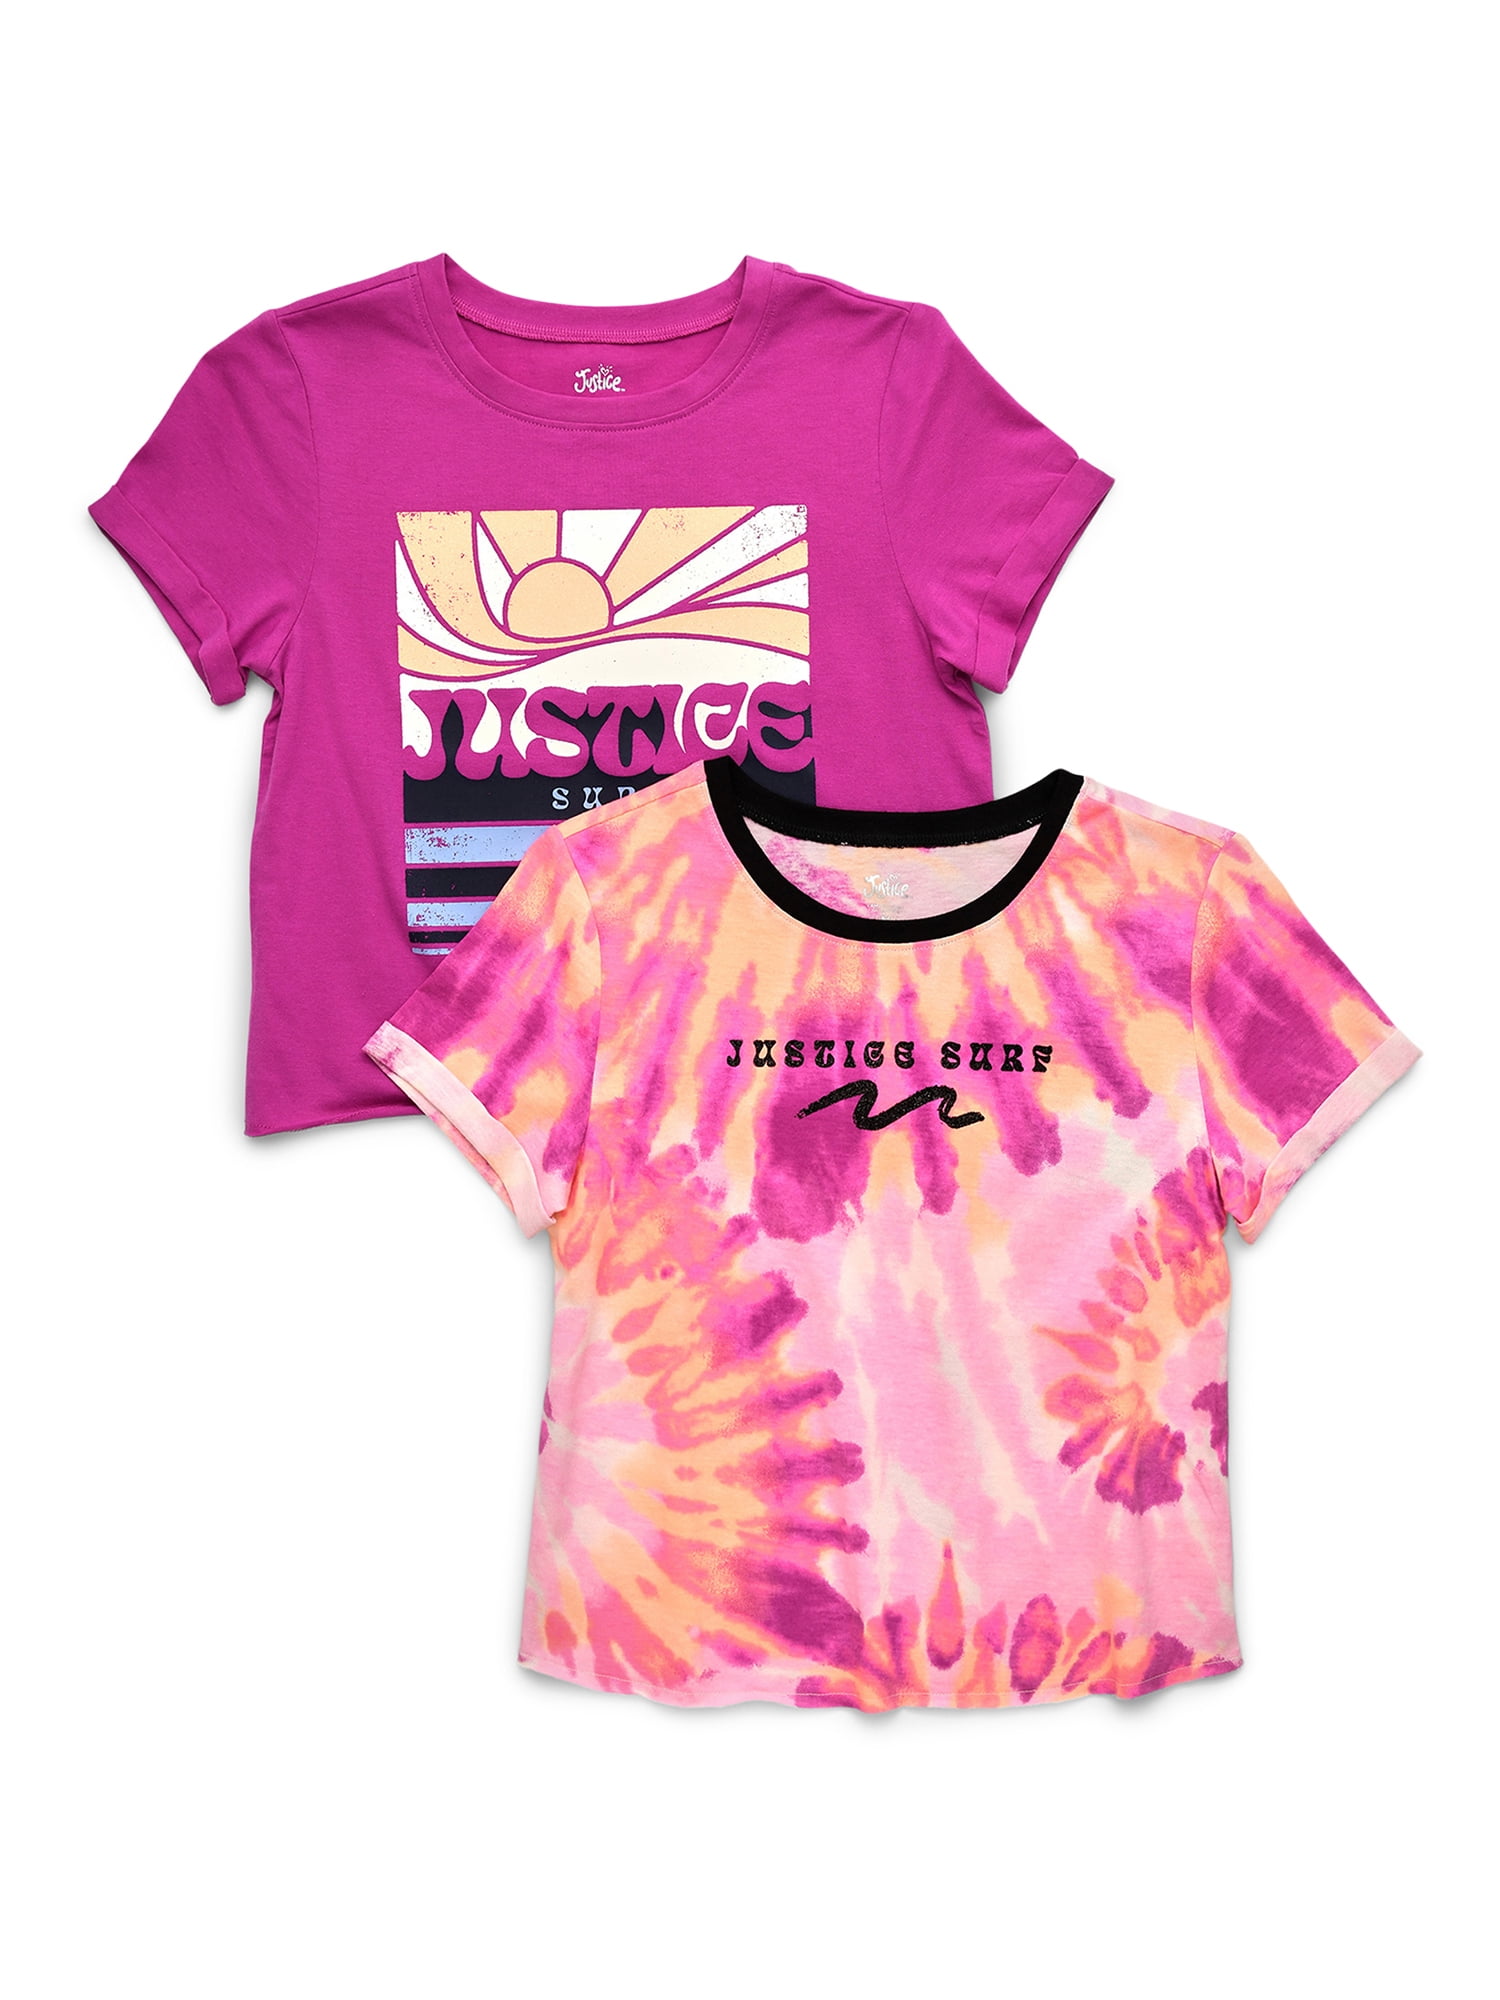 girls clothing from justice